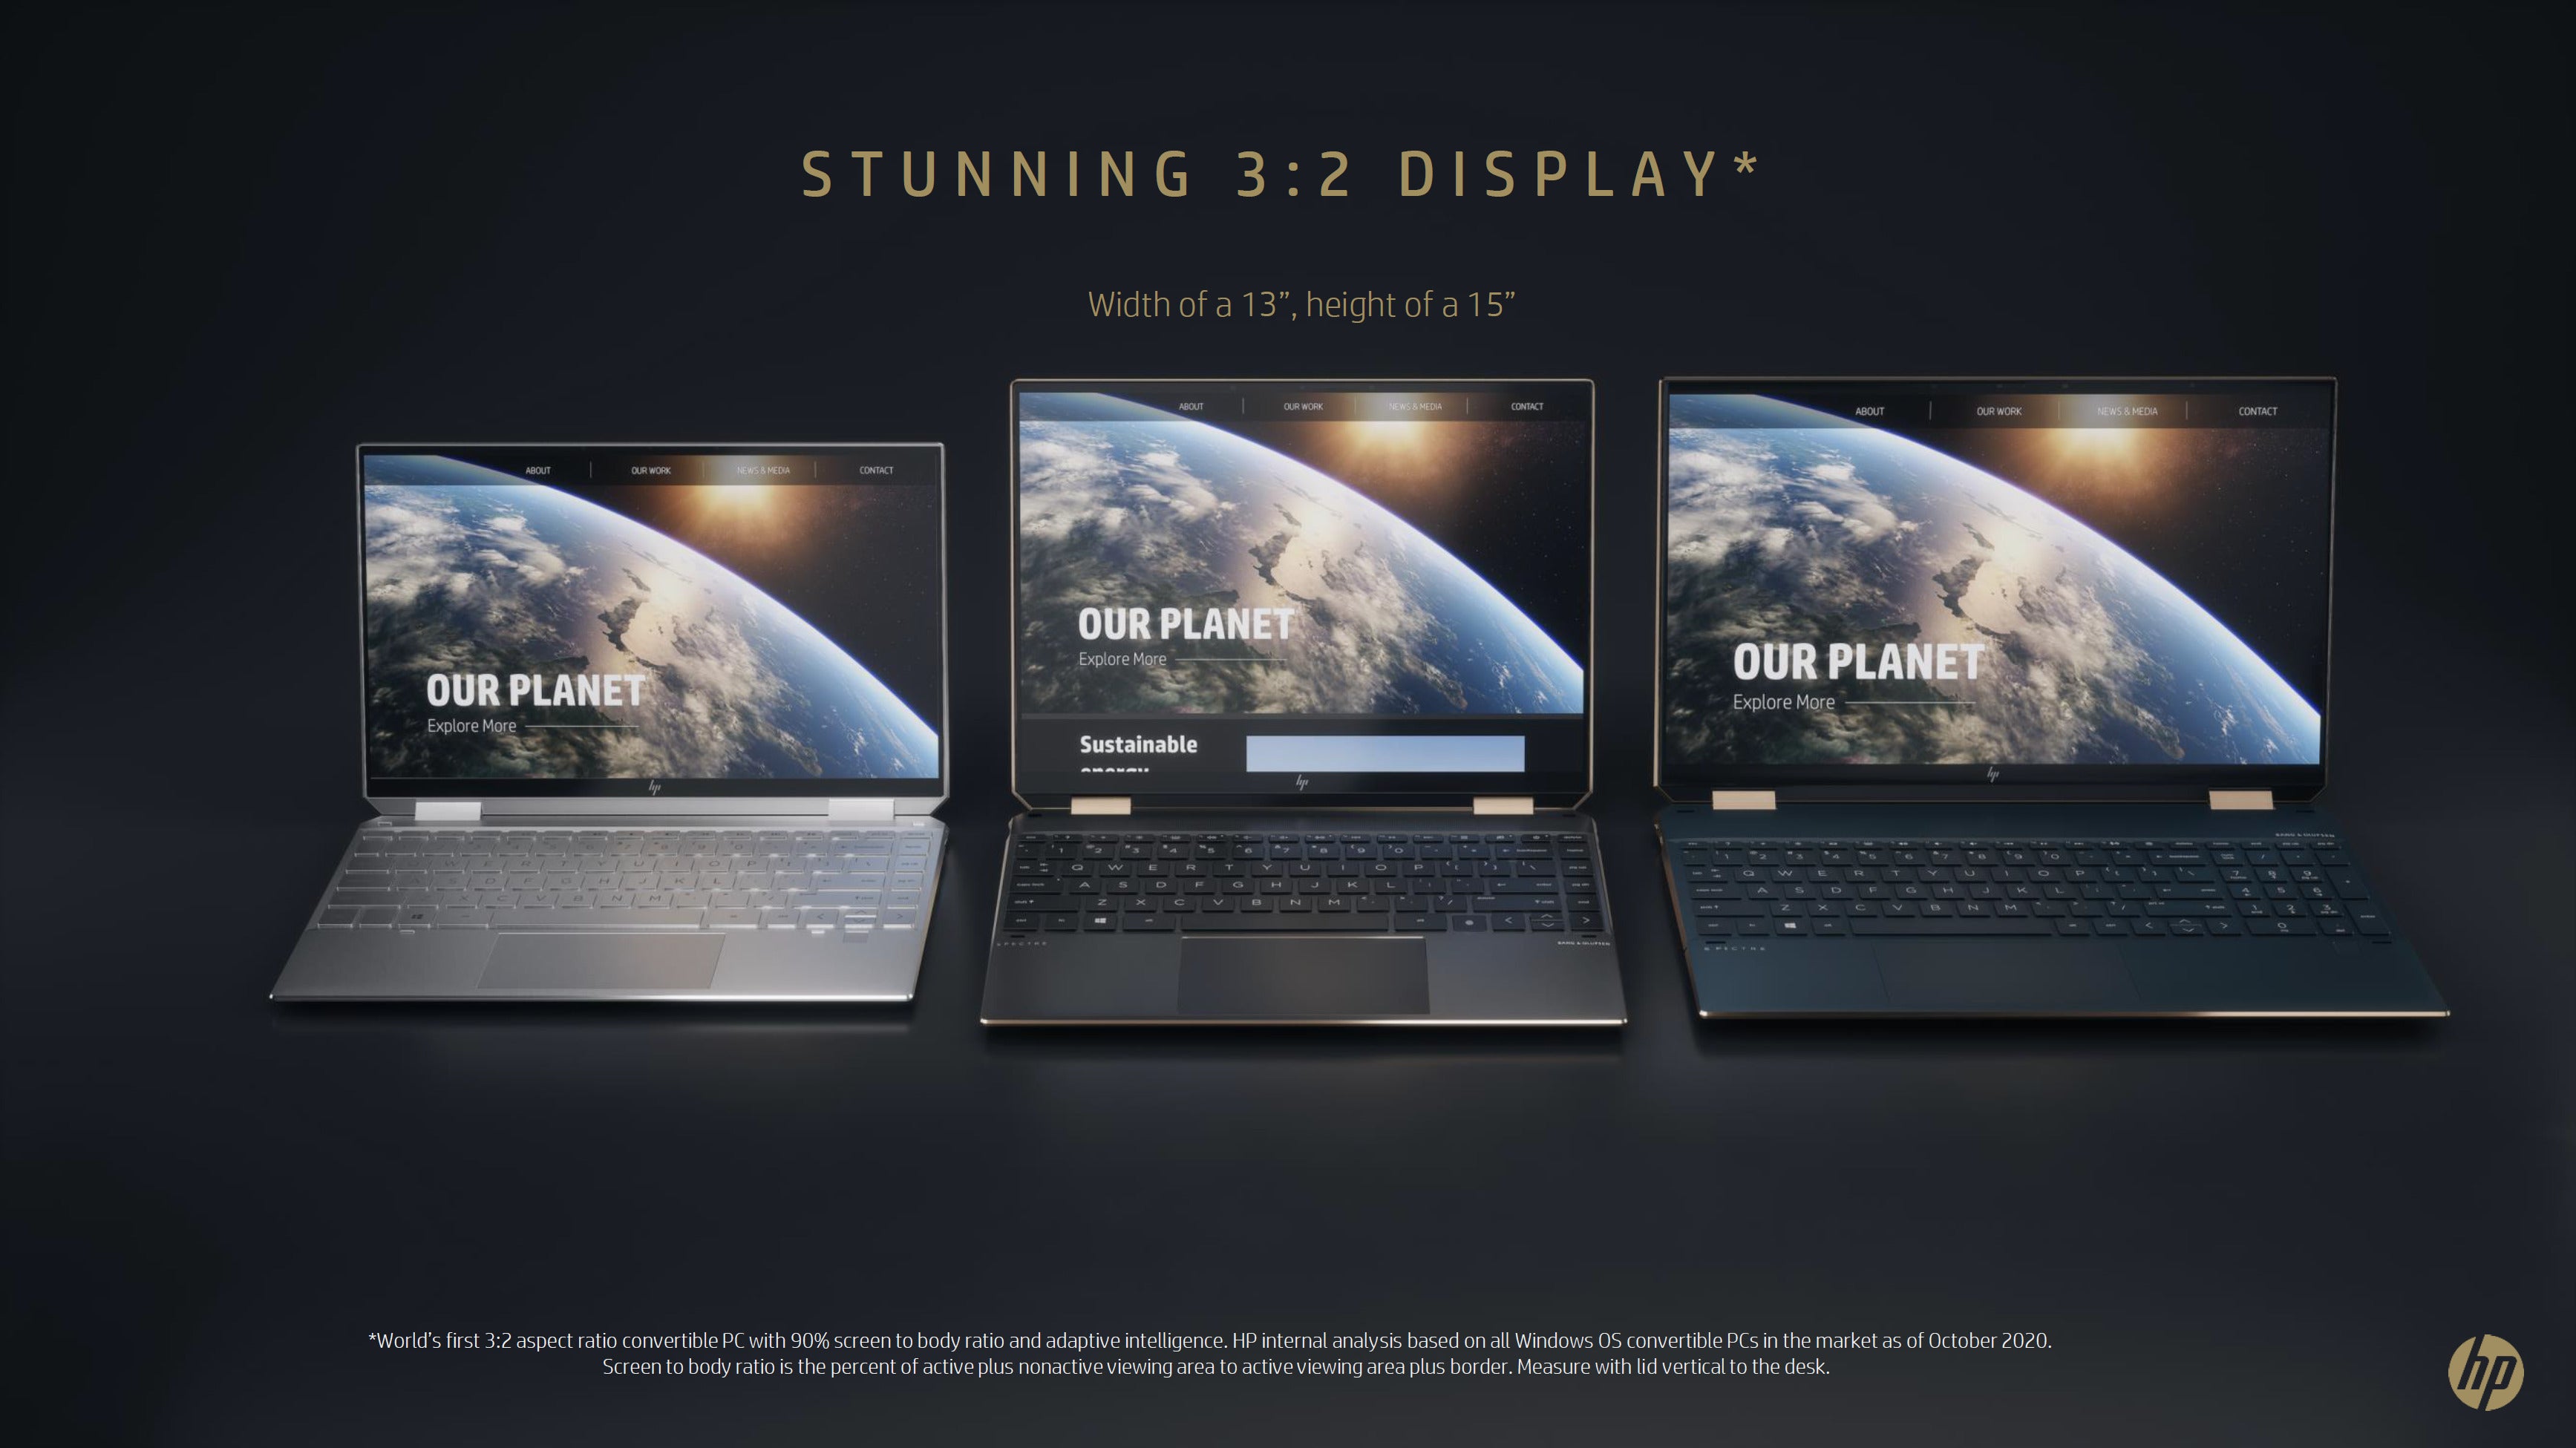 The HP Spectre x360 14 gets a lush OLED display and more AI smarts